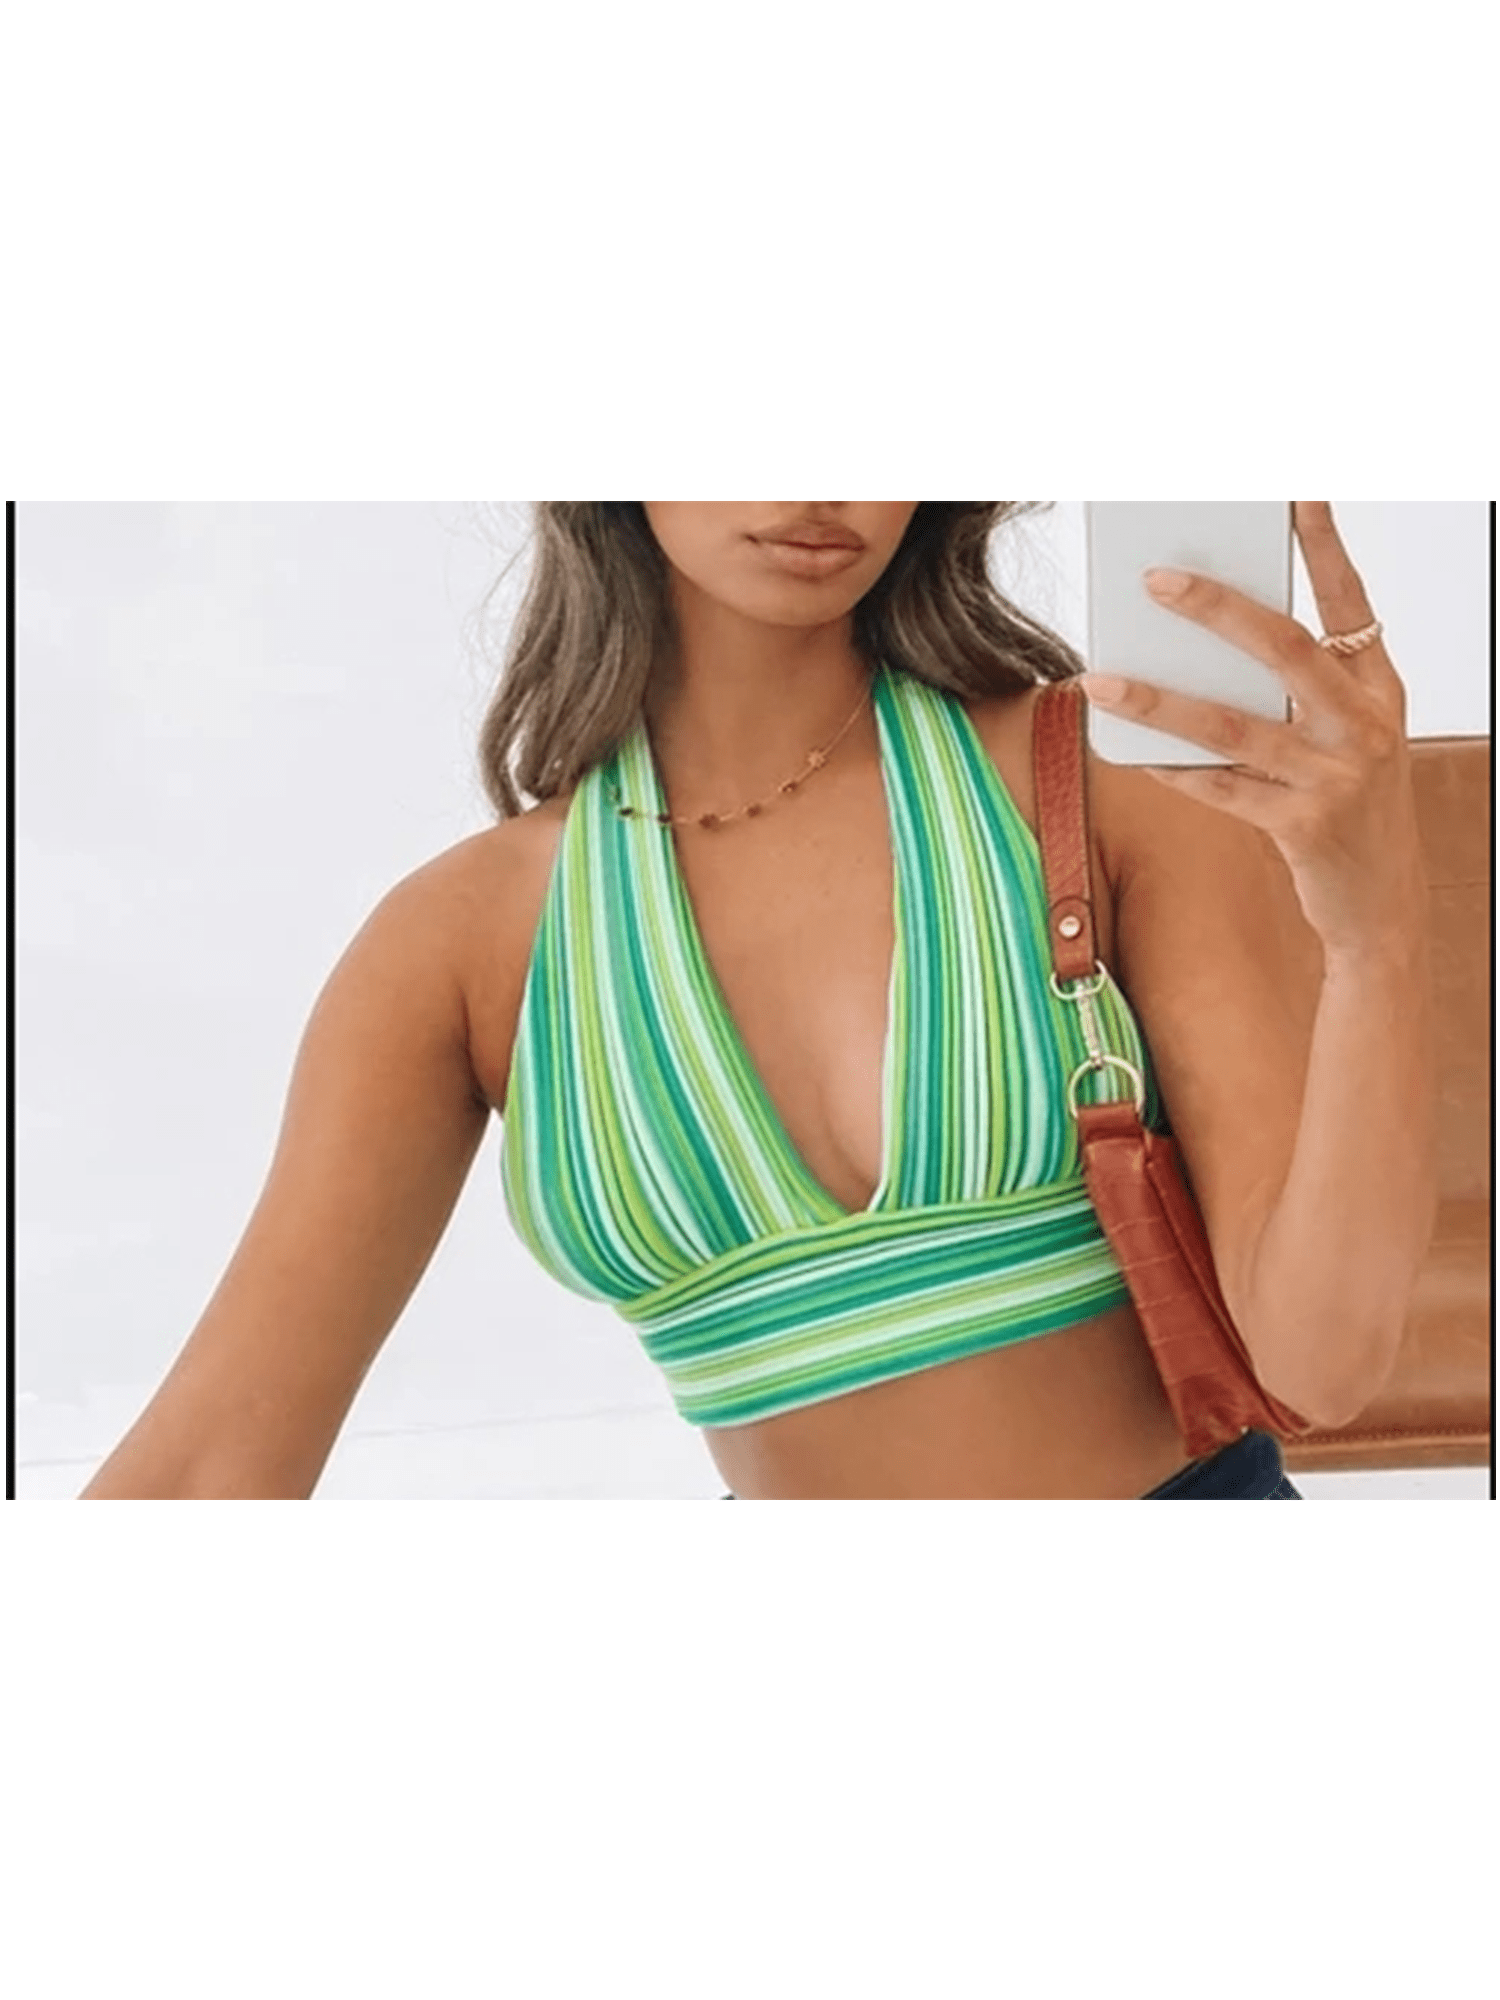 Halter Crop Top for Women Built in Bra, Adults Sexy Sleeveless Backless Tie  Up Striped V-Neck Tops